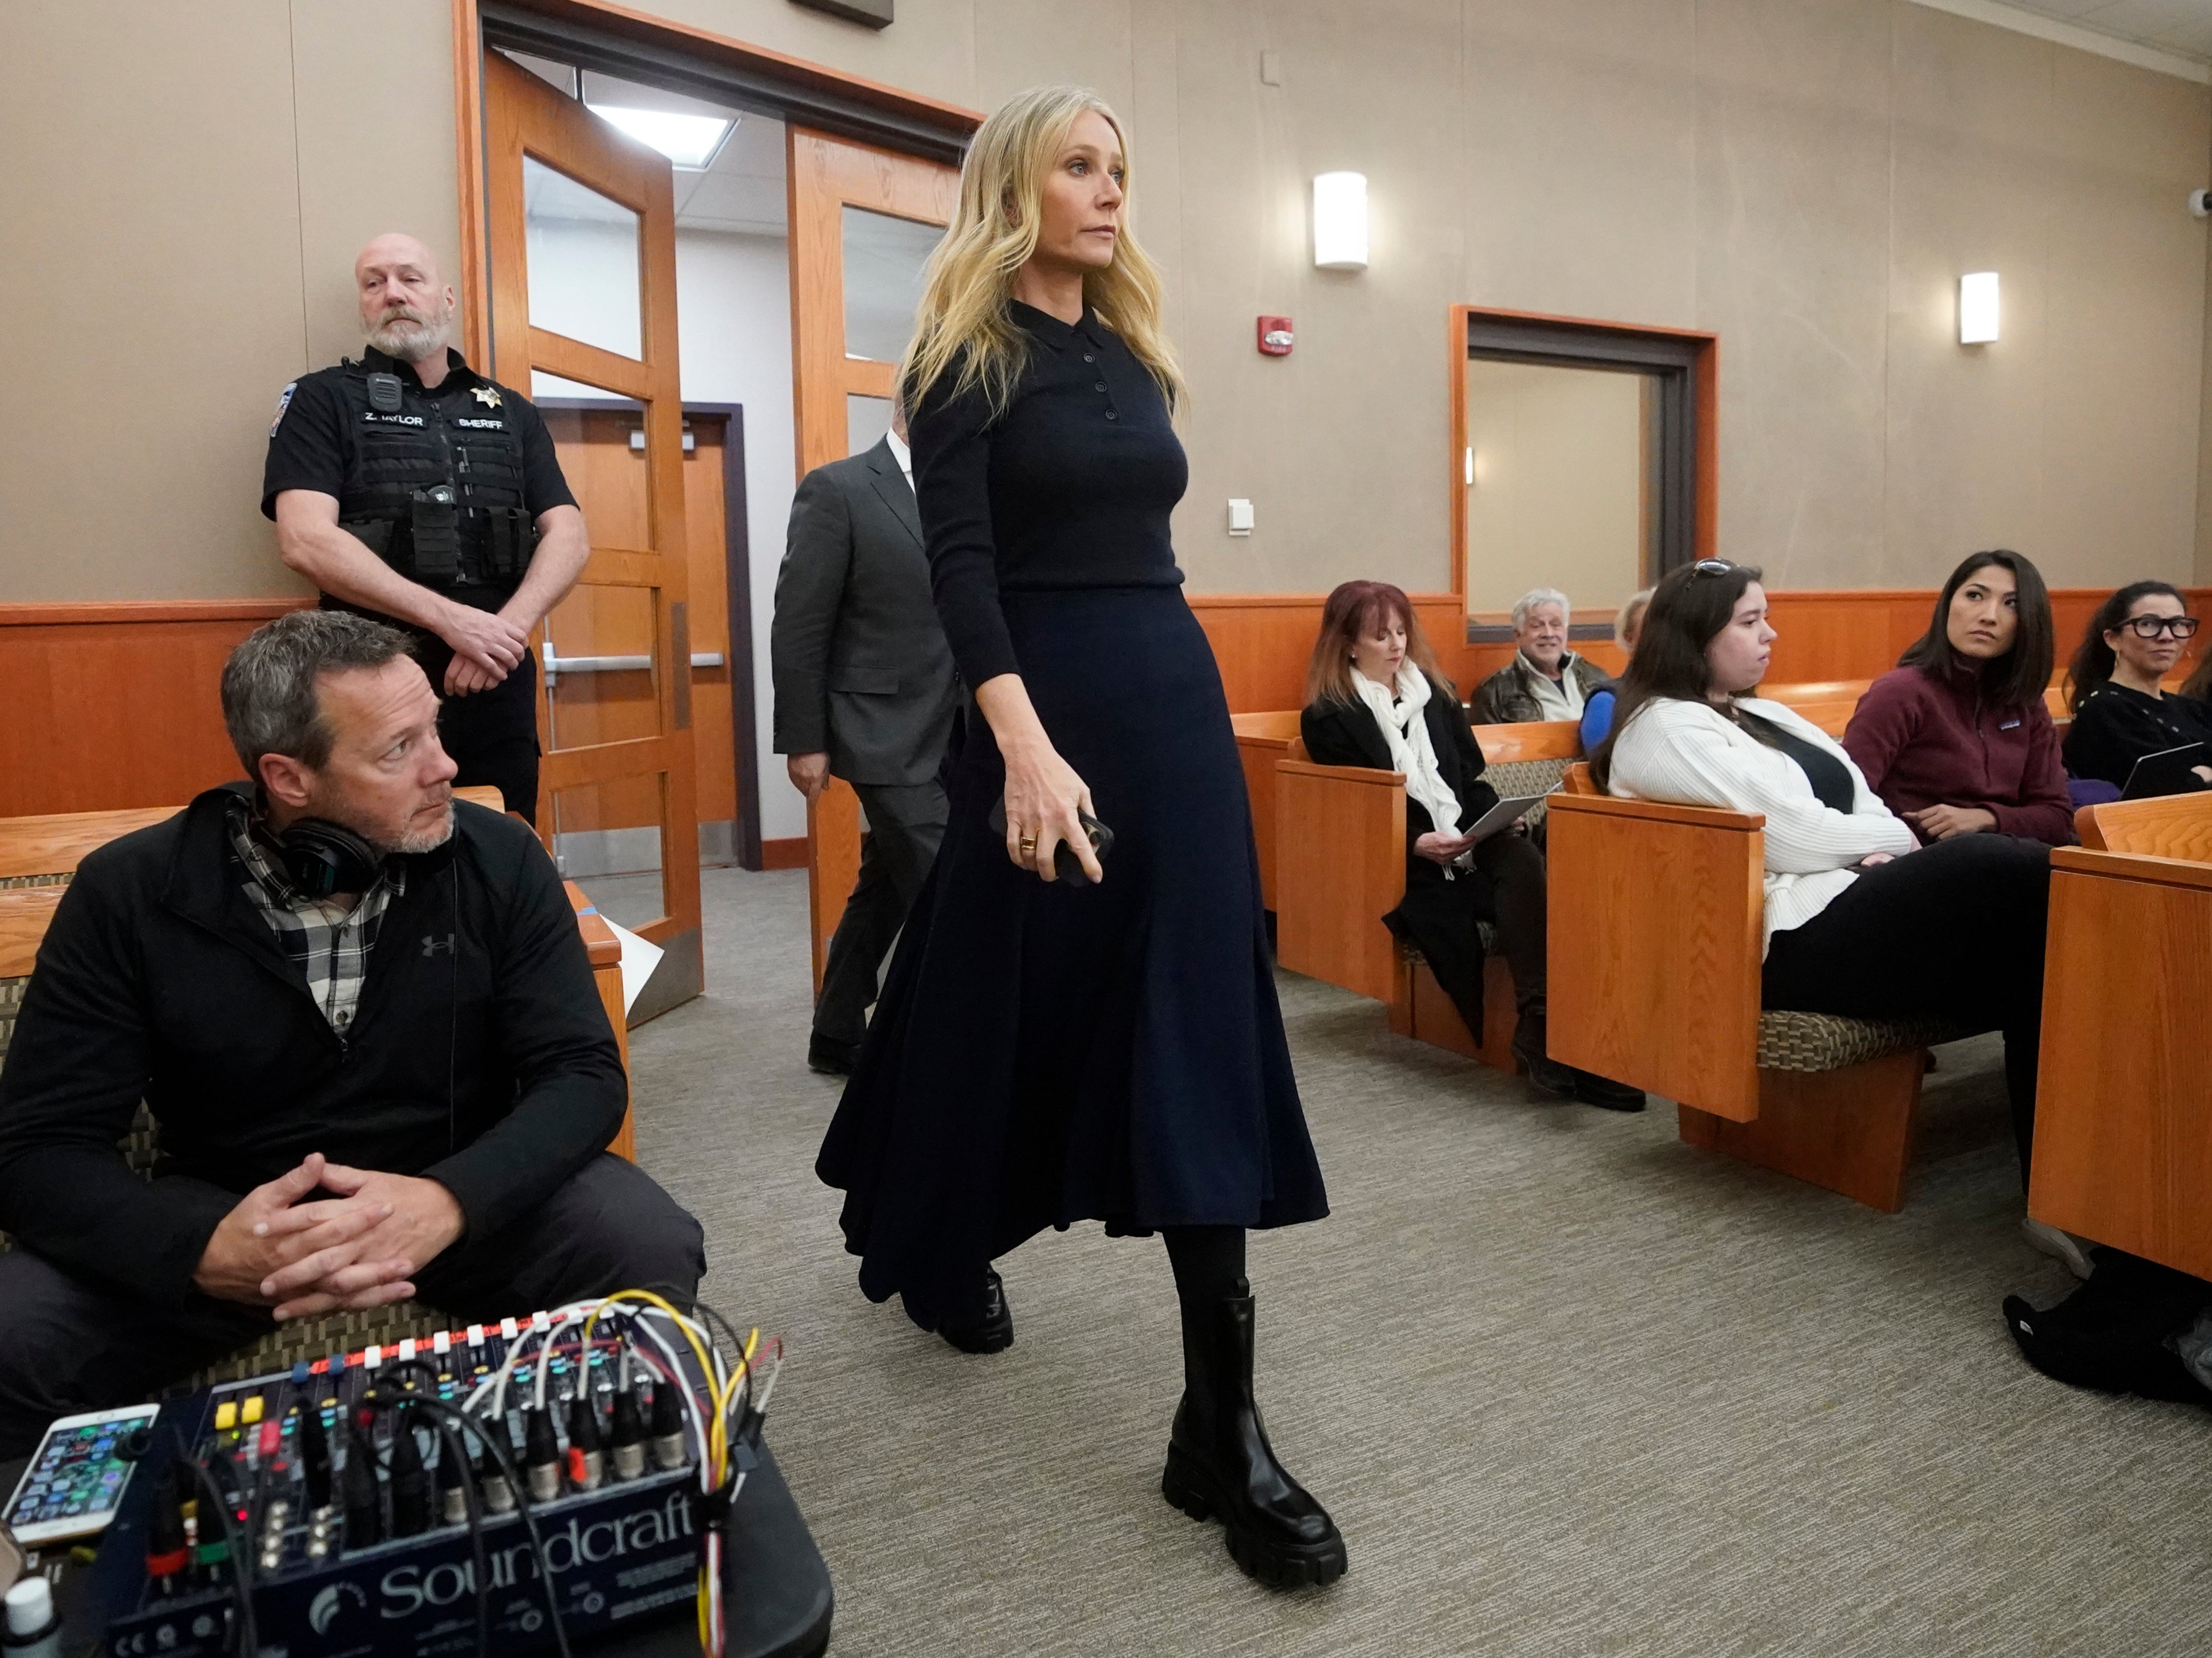 Gwyneth Paltrow enters the courtroom for her trial